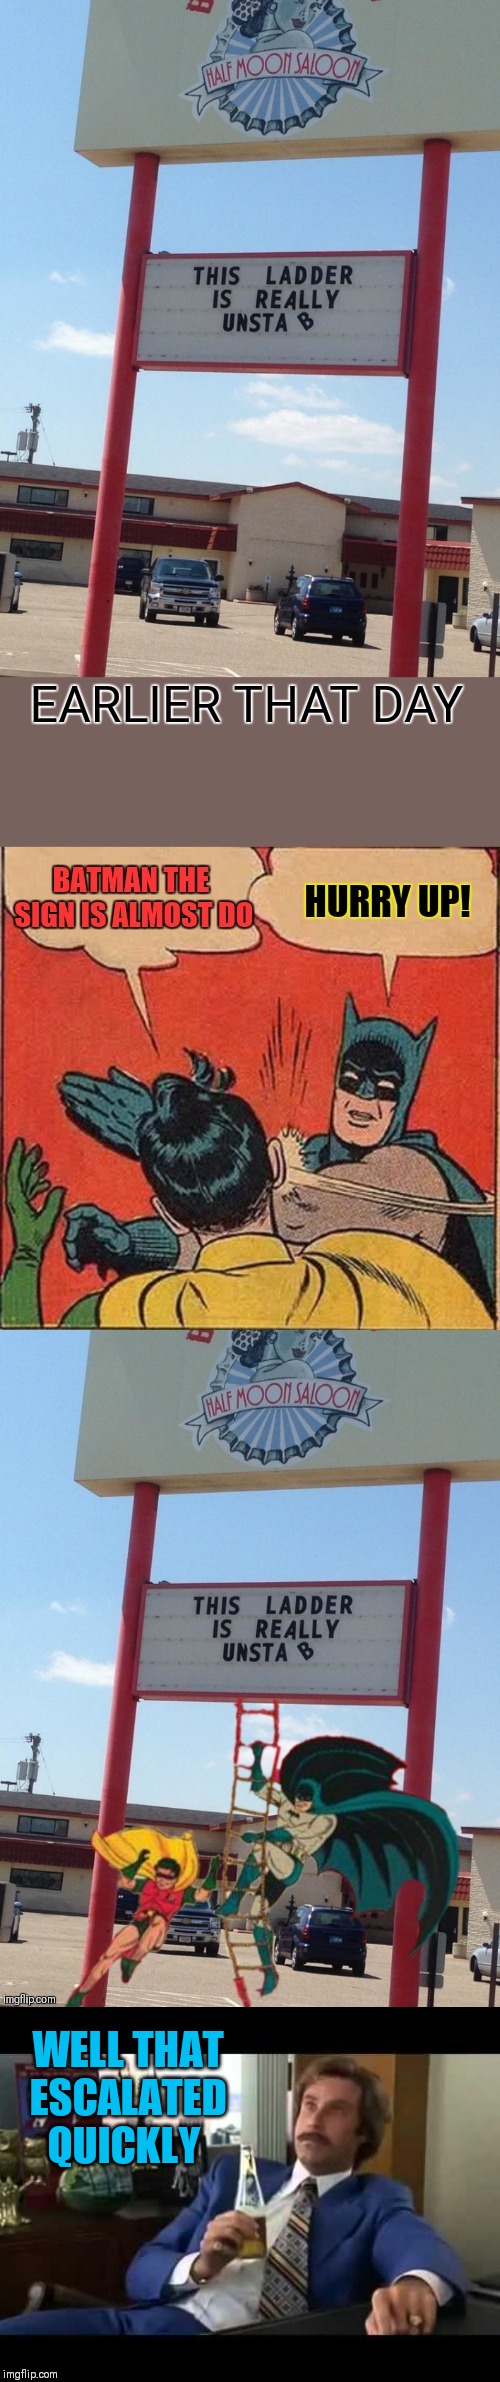 Task failed successfully... 44colt repost with a new touch ;) | WELL THAT ESCALATED QUICKLY | image tagged in memes,well that escalated quickly,44colt,repost,batman slapping robin,task failed successfully | made w/ Imgflip meme maker